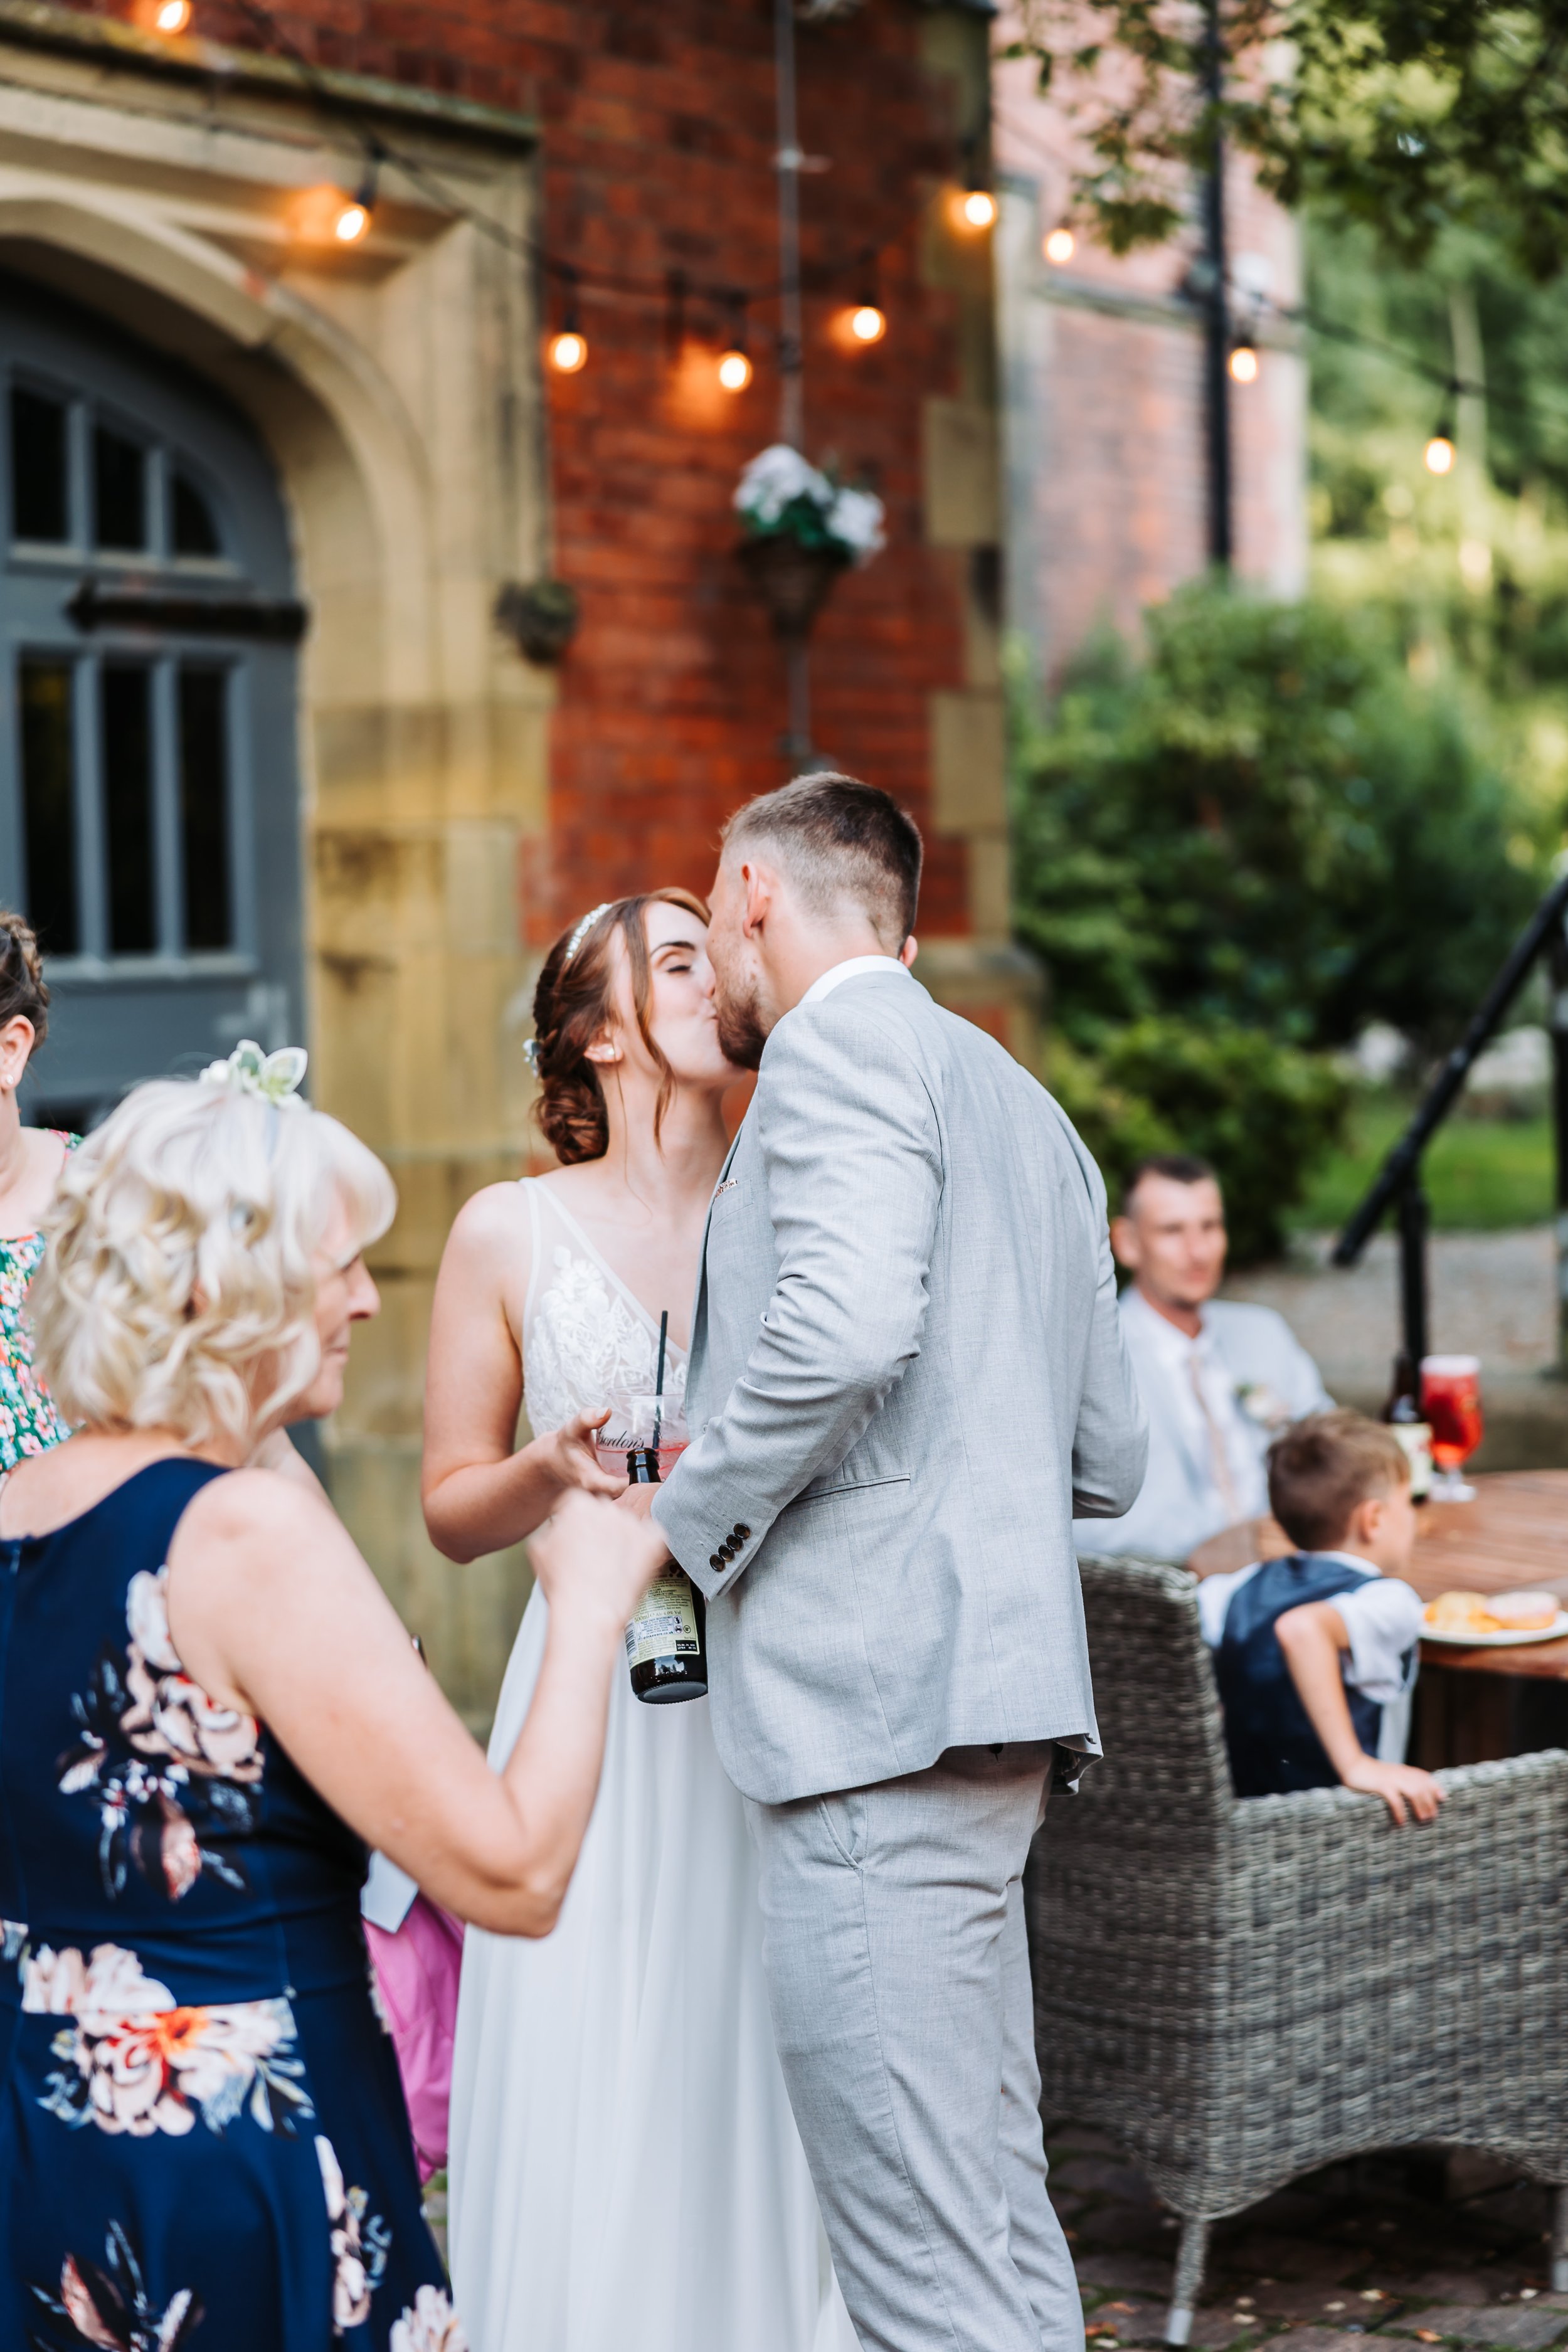 The Pumping Station Leicestershire Wedding Photographer 46.jpg